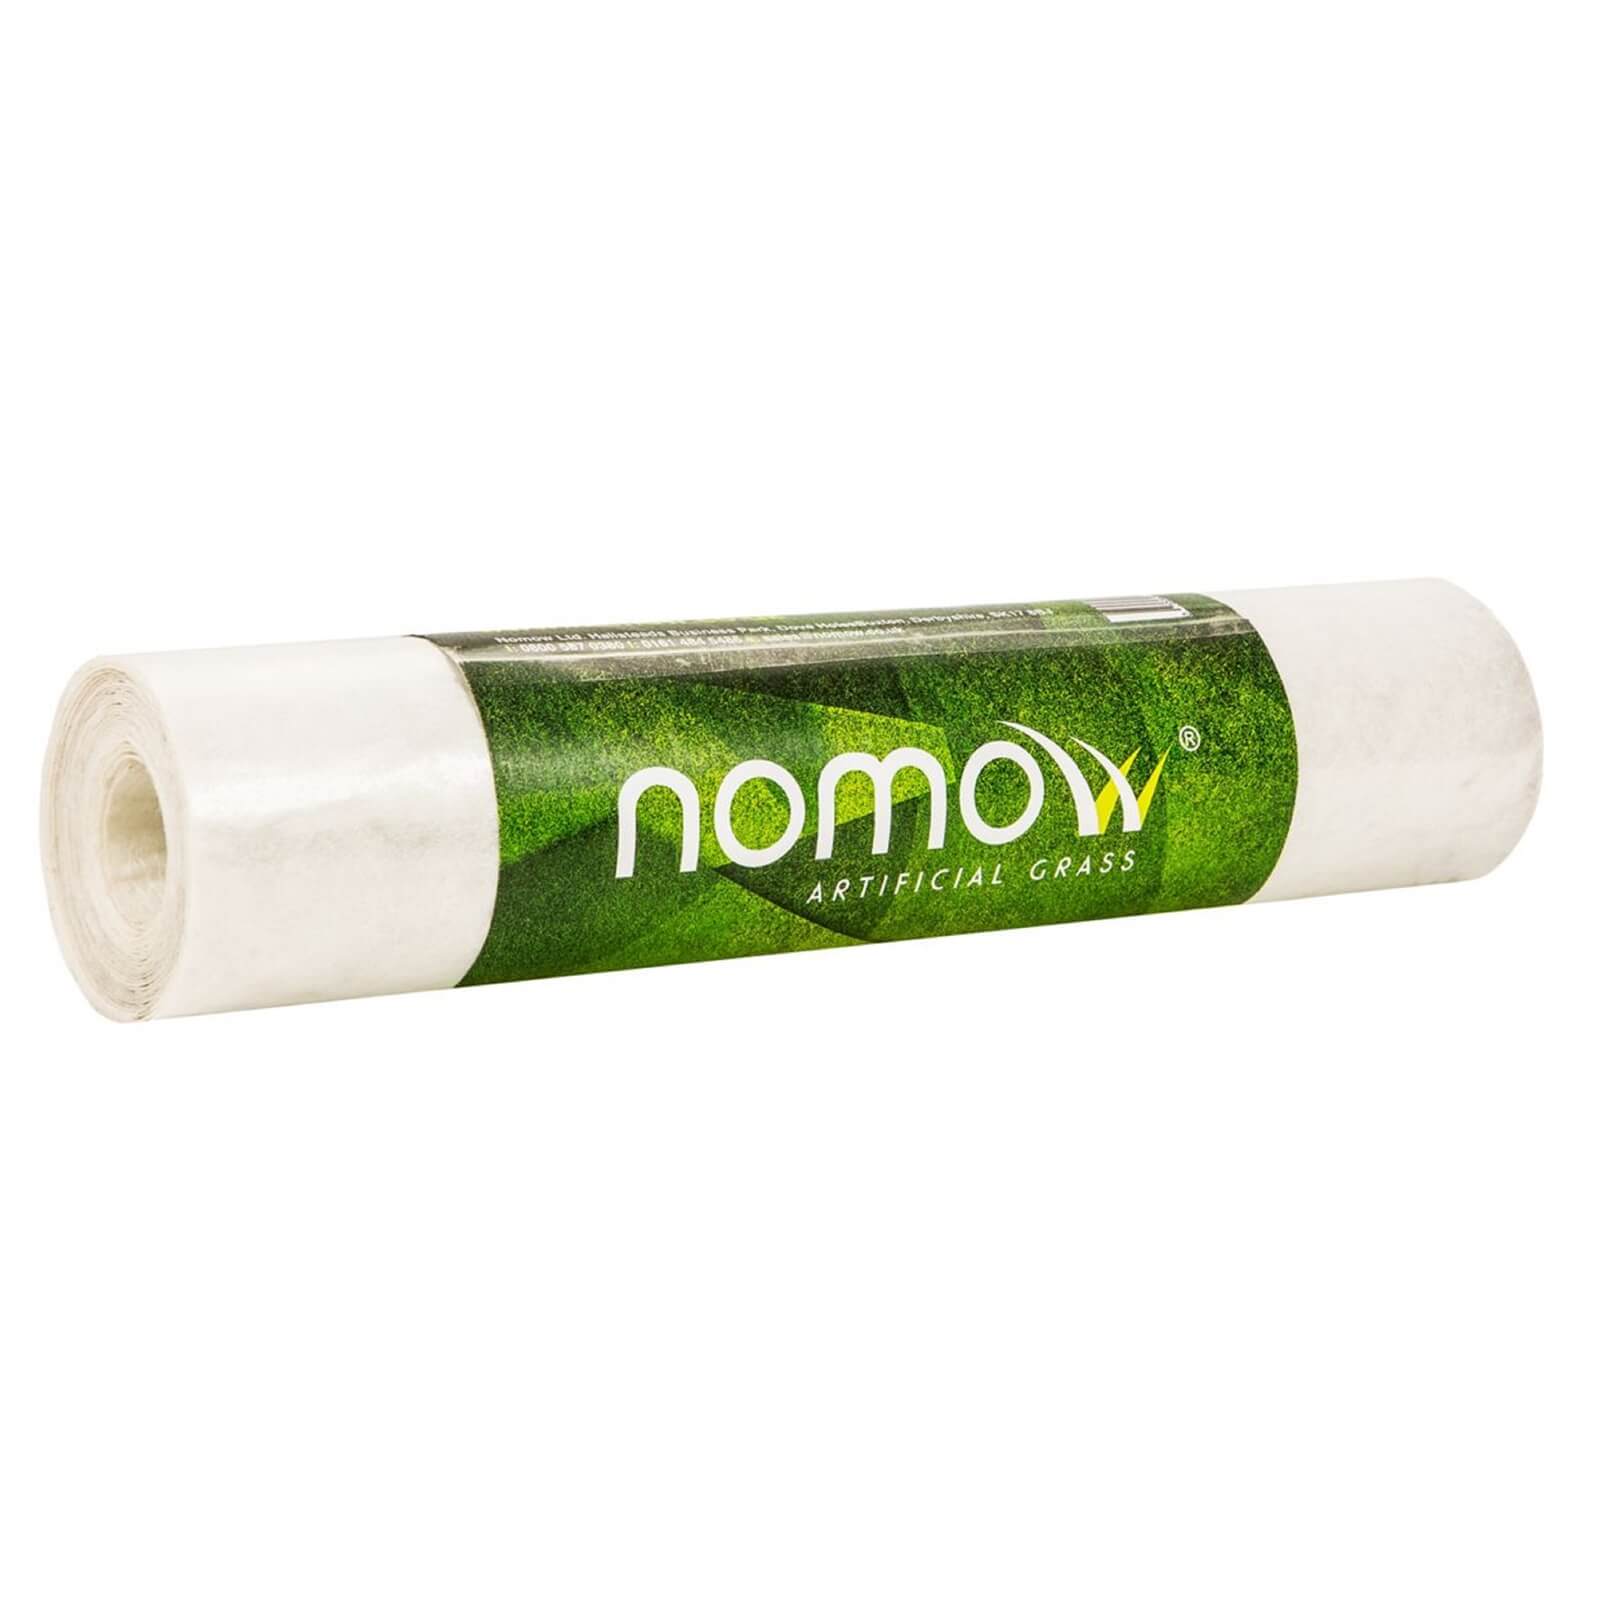 Photo of Nomow Artificial Grass Joining Tape - 4m